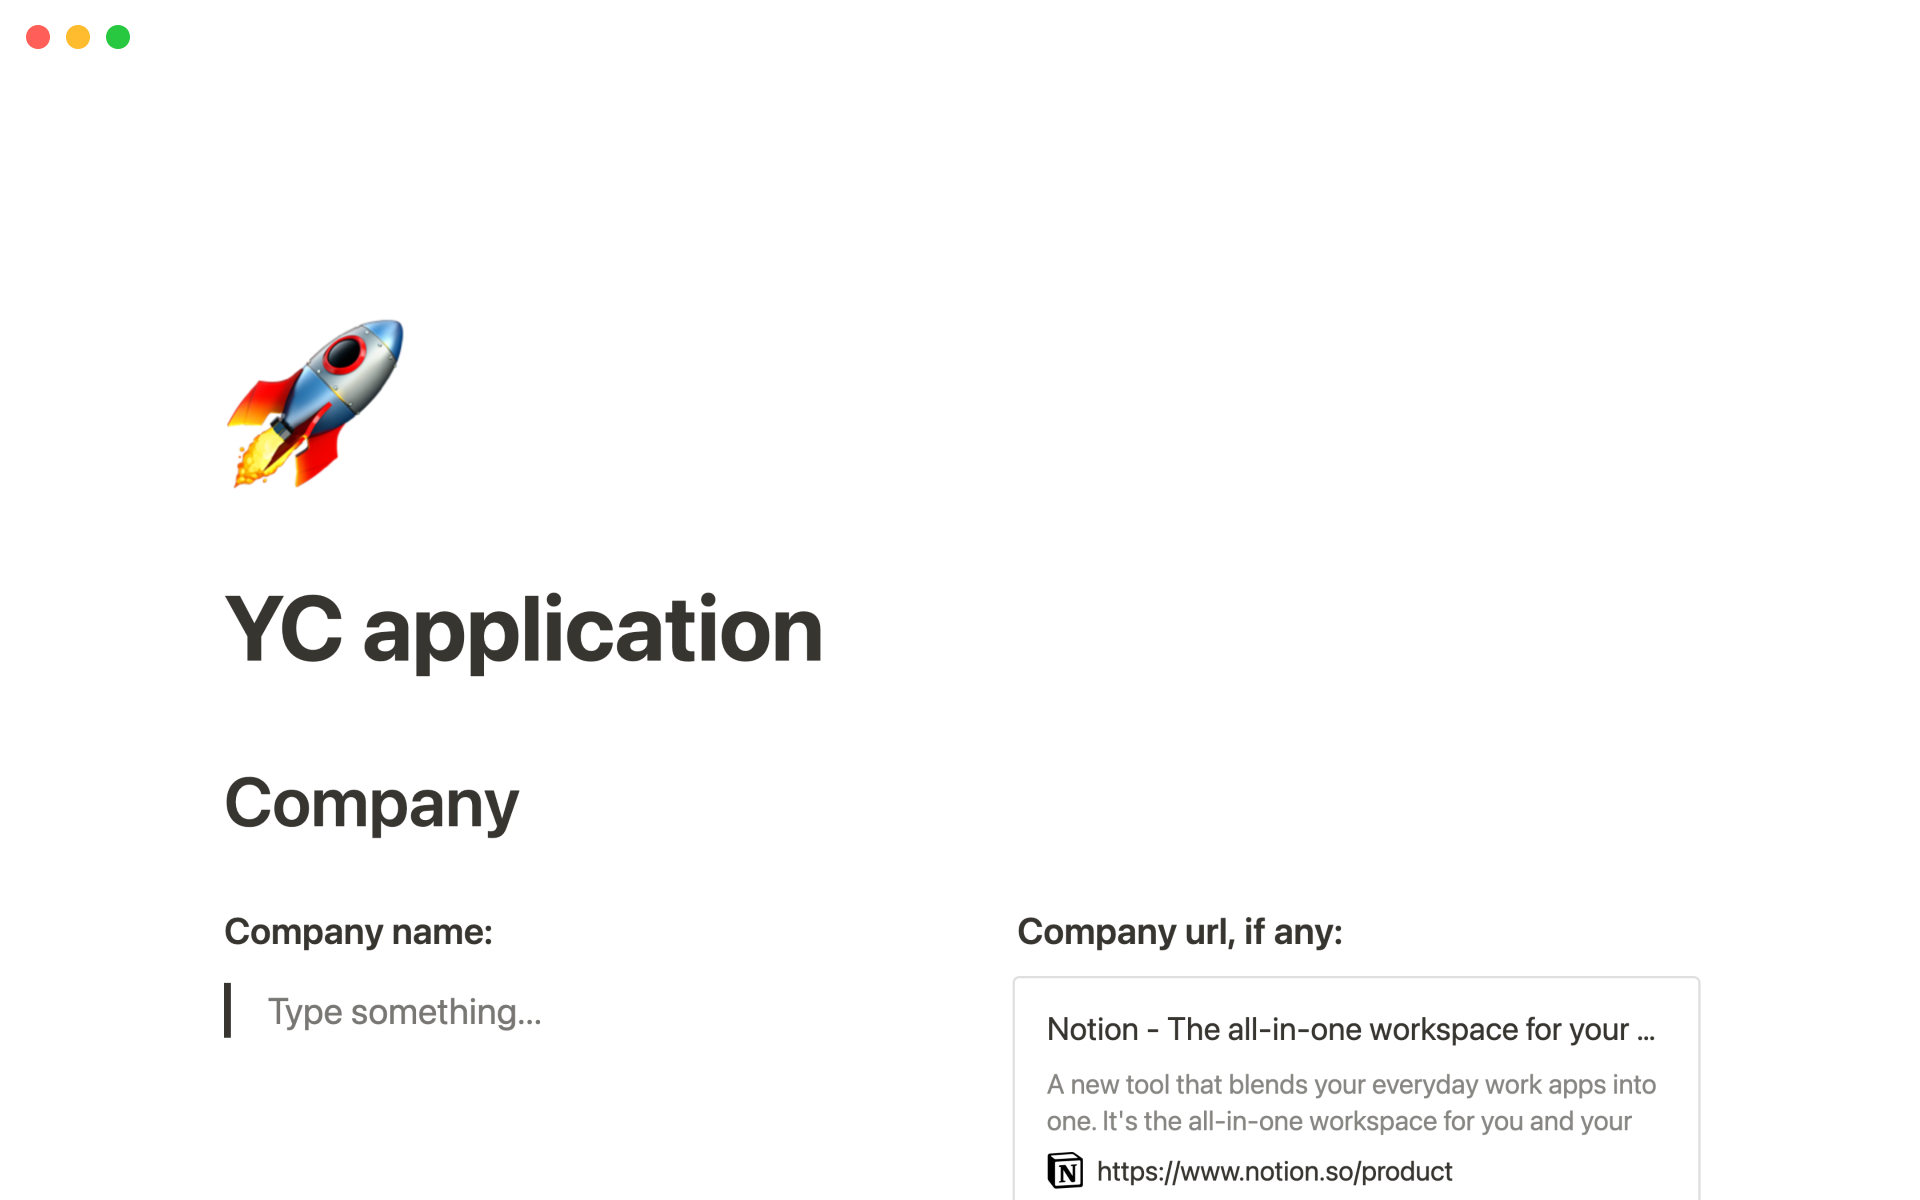 Template for the Y Combinator application form.